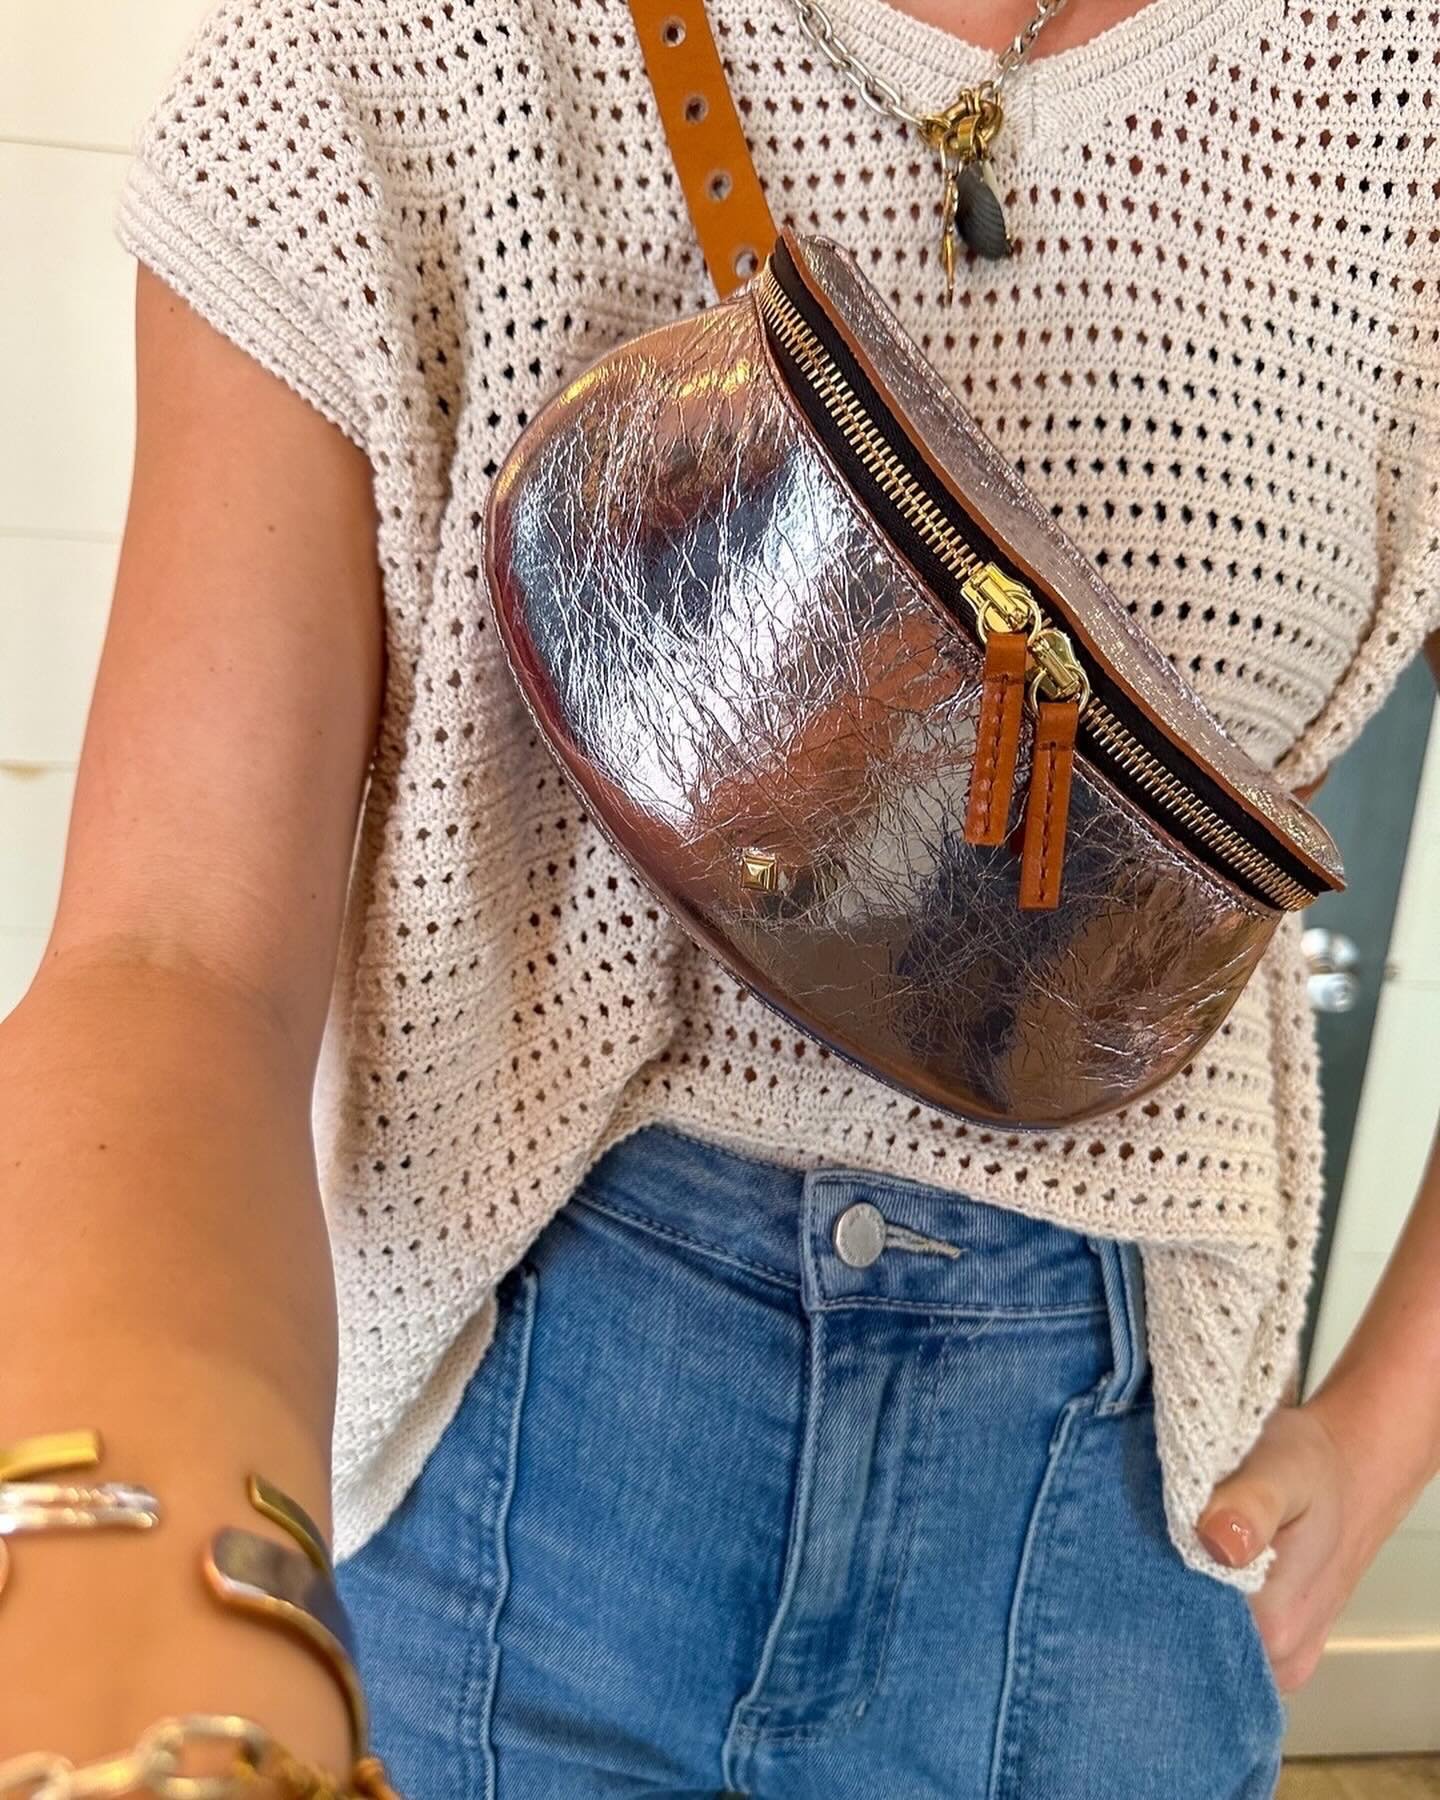 Can&rsquo;t go wrong with a metallic crossbody to add some shimmer to your wardrobe 
**Bonus points for being the MVP of travel!**